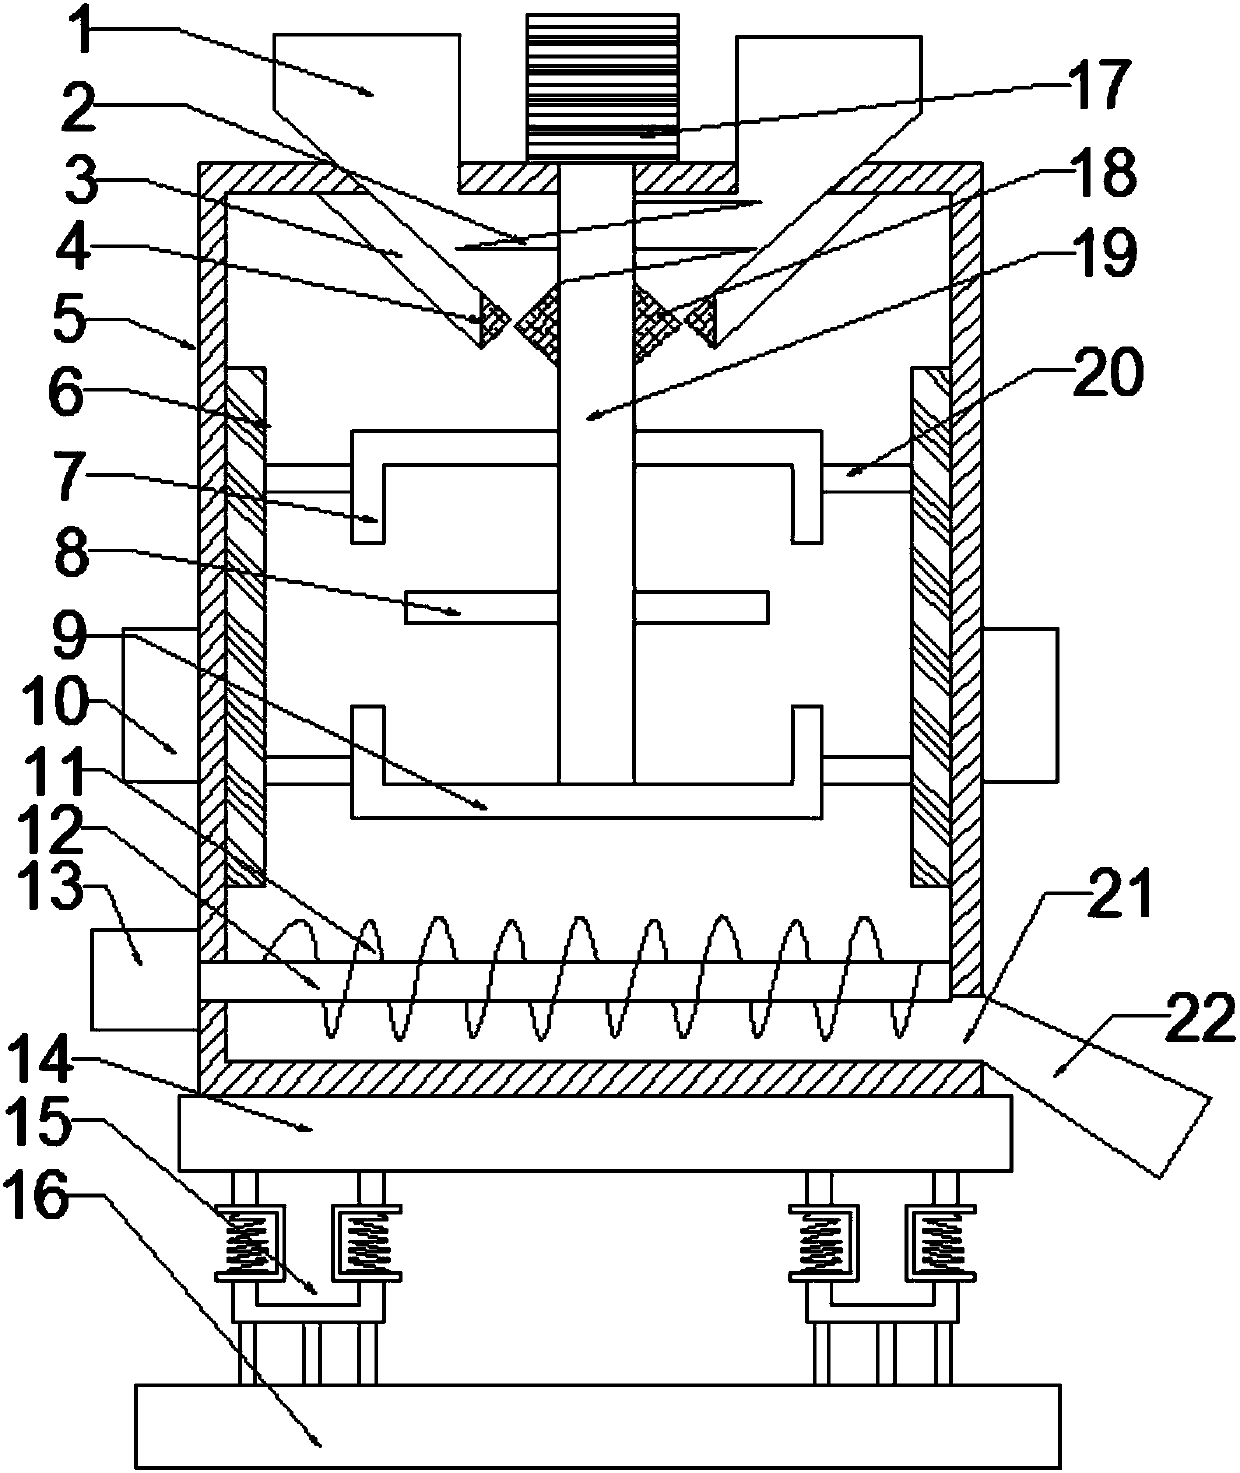 Fertilizer mixing apparatus for agriculture